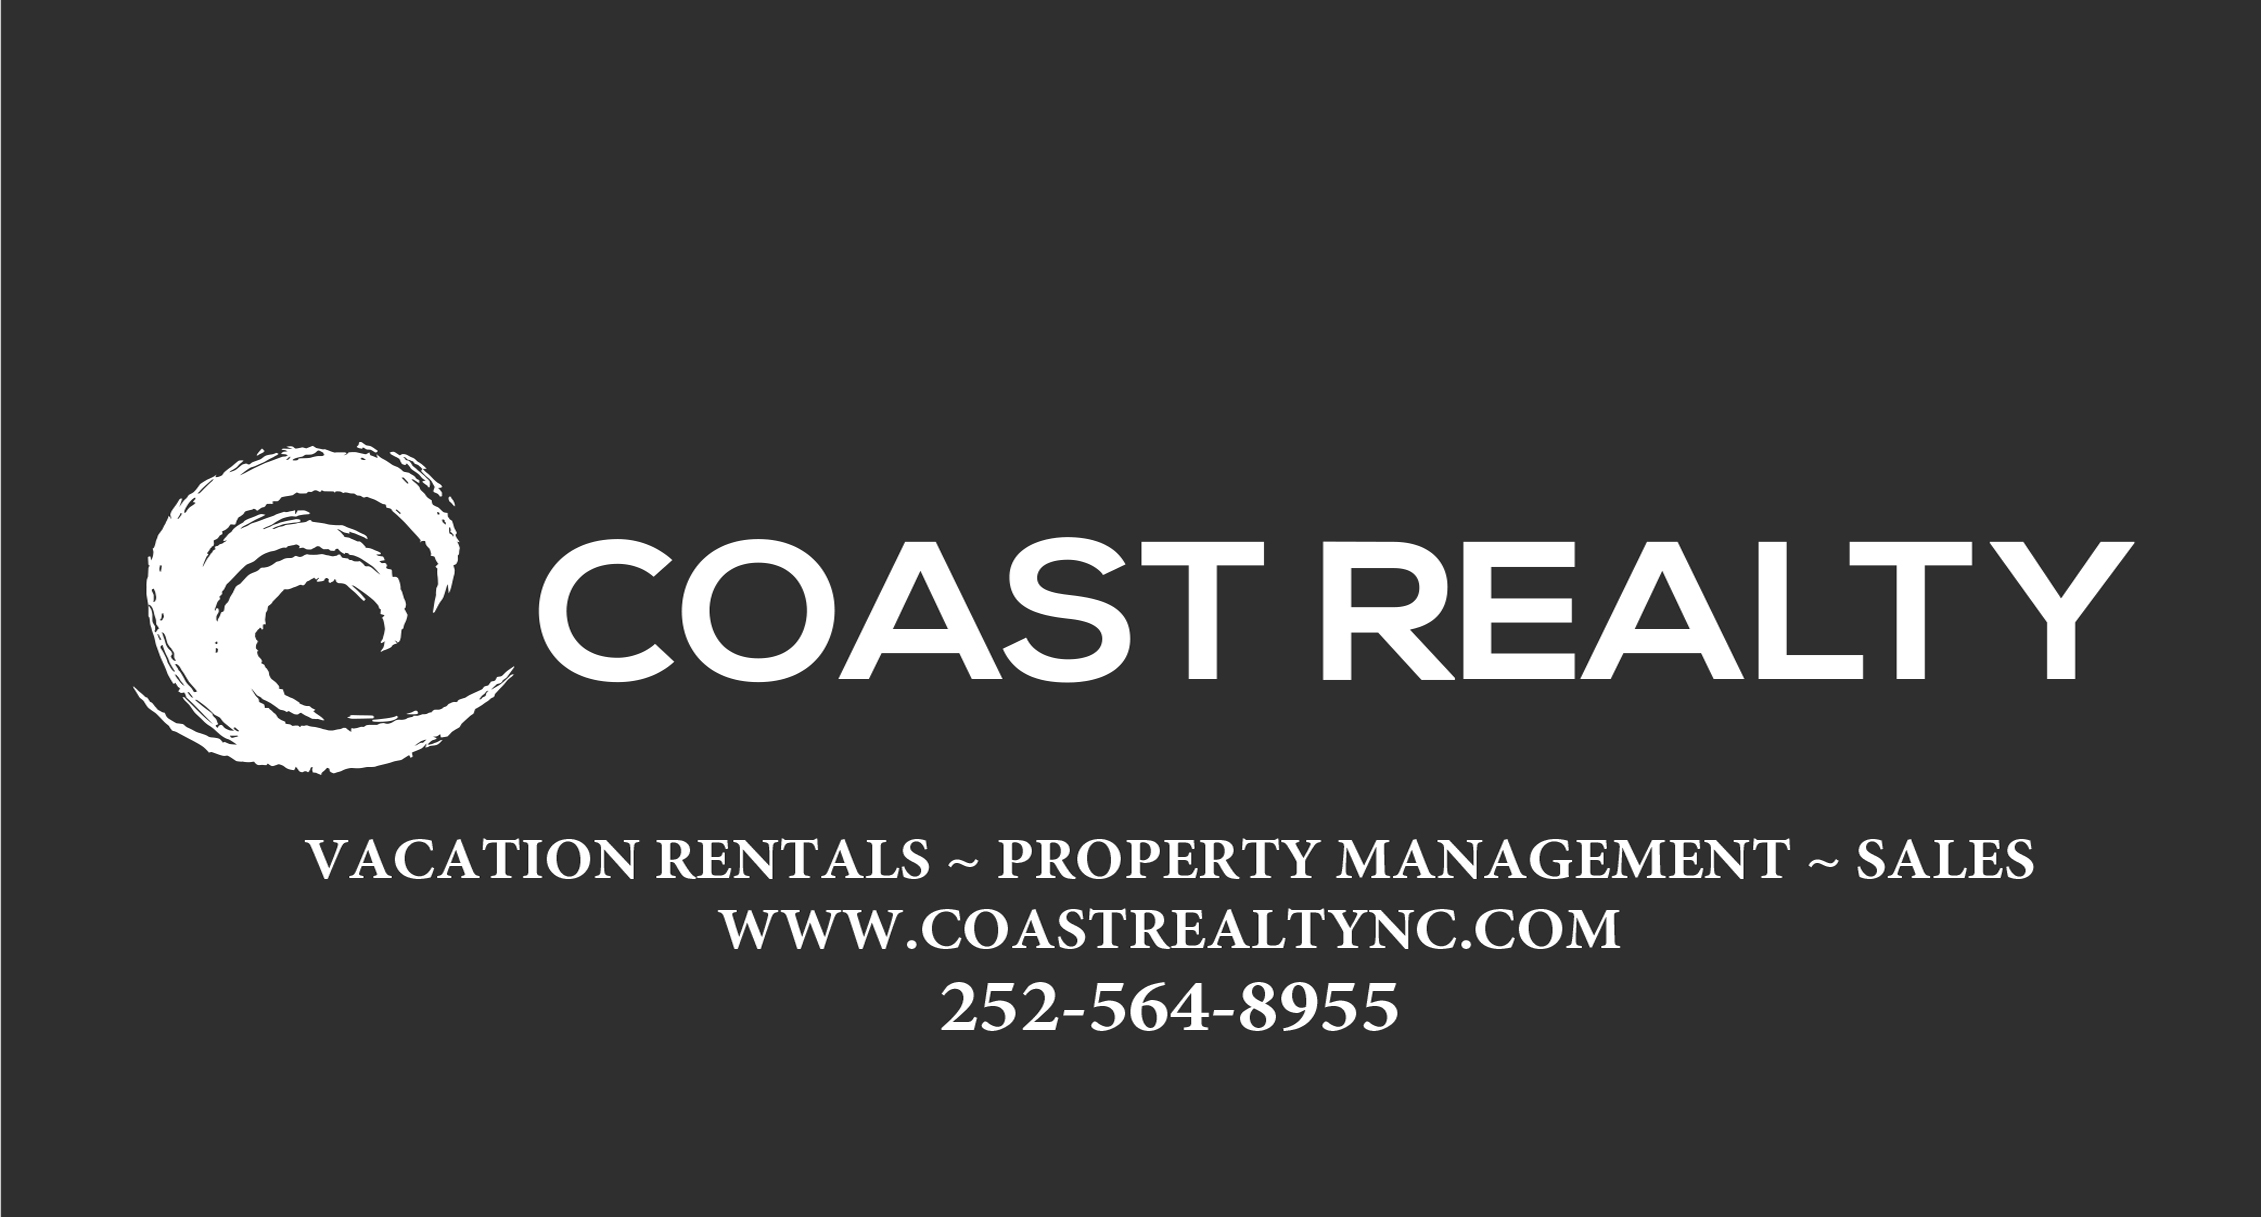 Coast Realty NC - Outer Banks Vacation Rental Accommodations and Property Management - Book with a Local Professional!